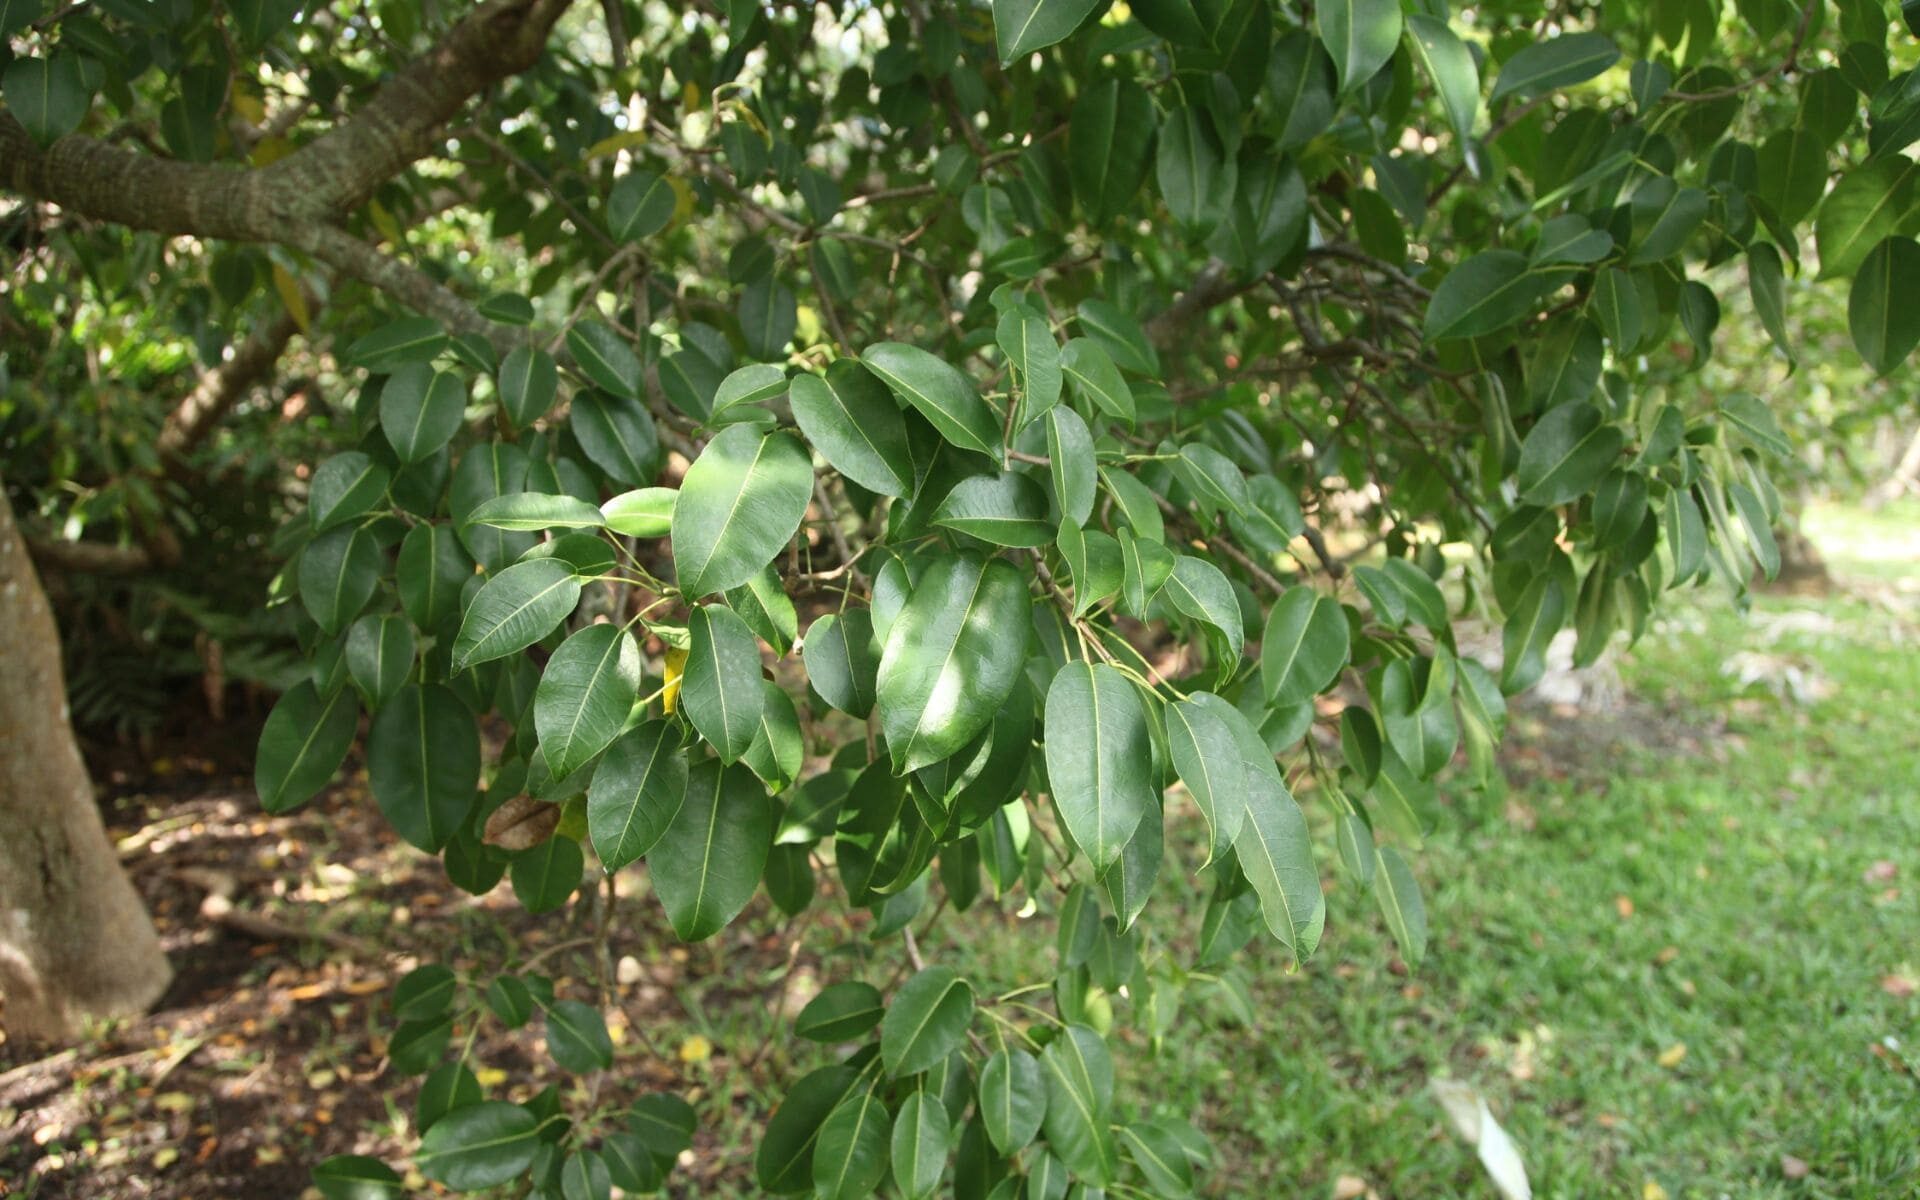 The green leaves of a toxic manchineel tree in South Florida.